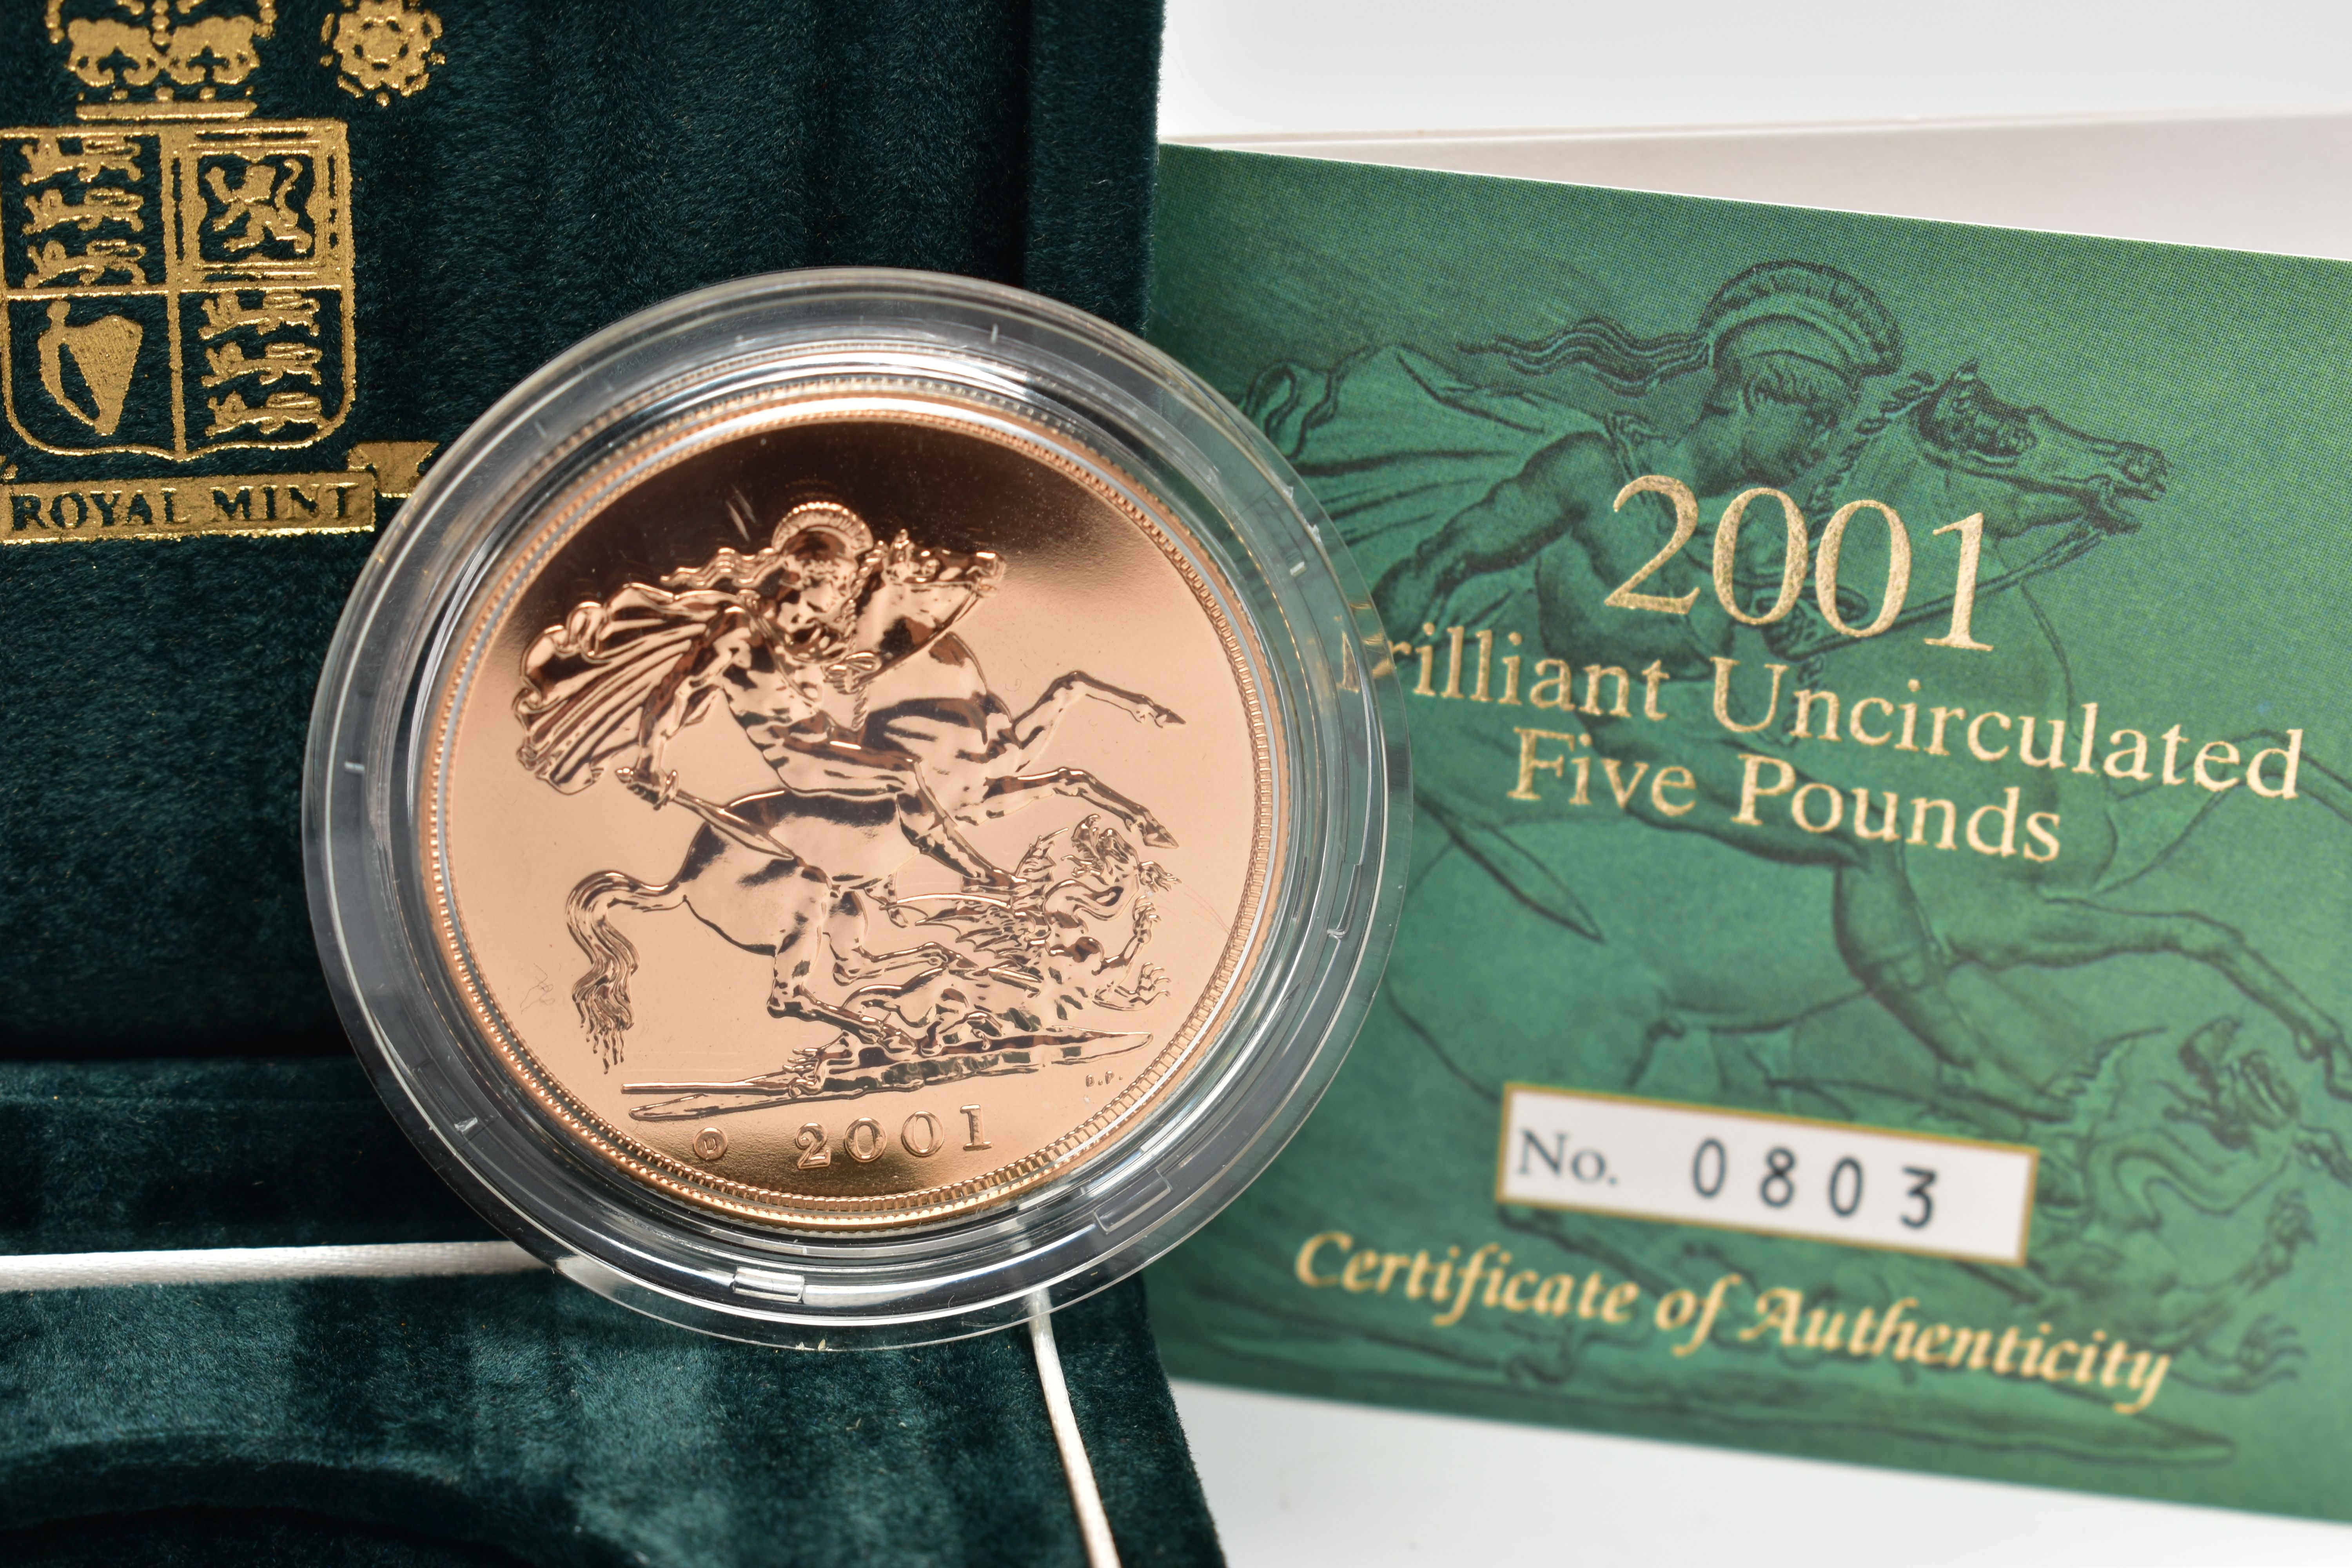 A ROYAL MINT UNITED KINDOM 2001 BRILLIANT UNCIRCULATED GOLD FIVE POUND COIN, 22 carat gold, 39.94